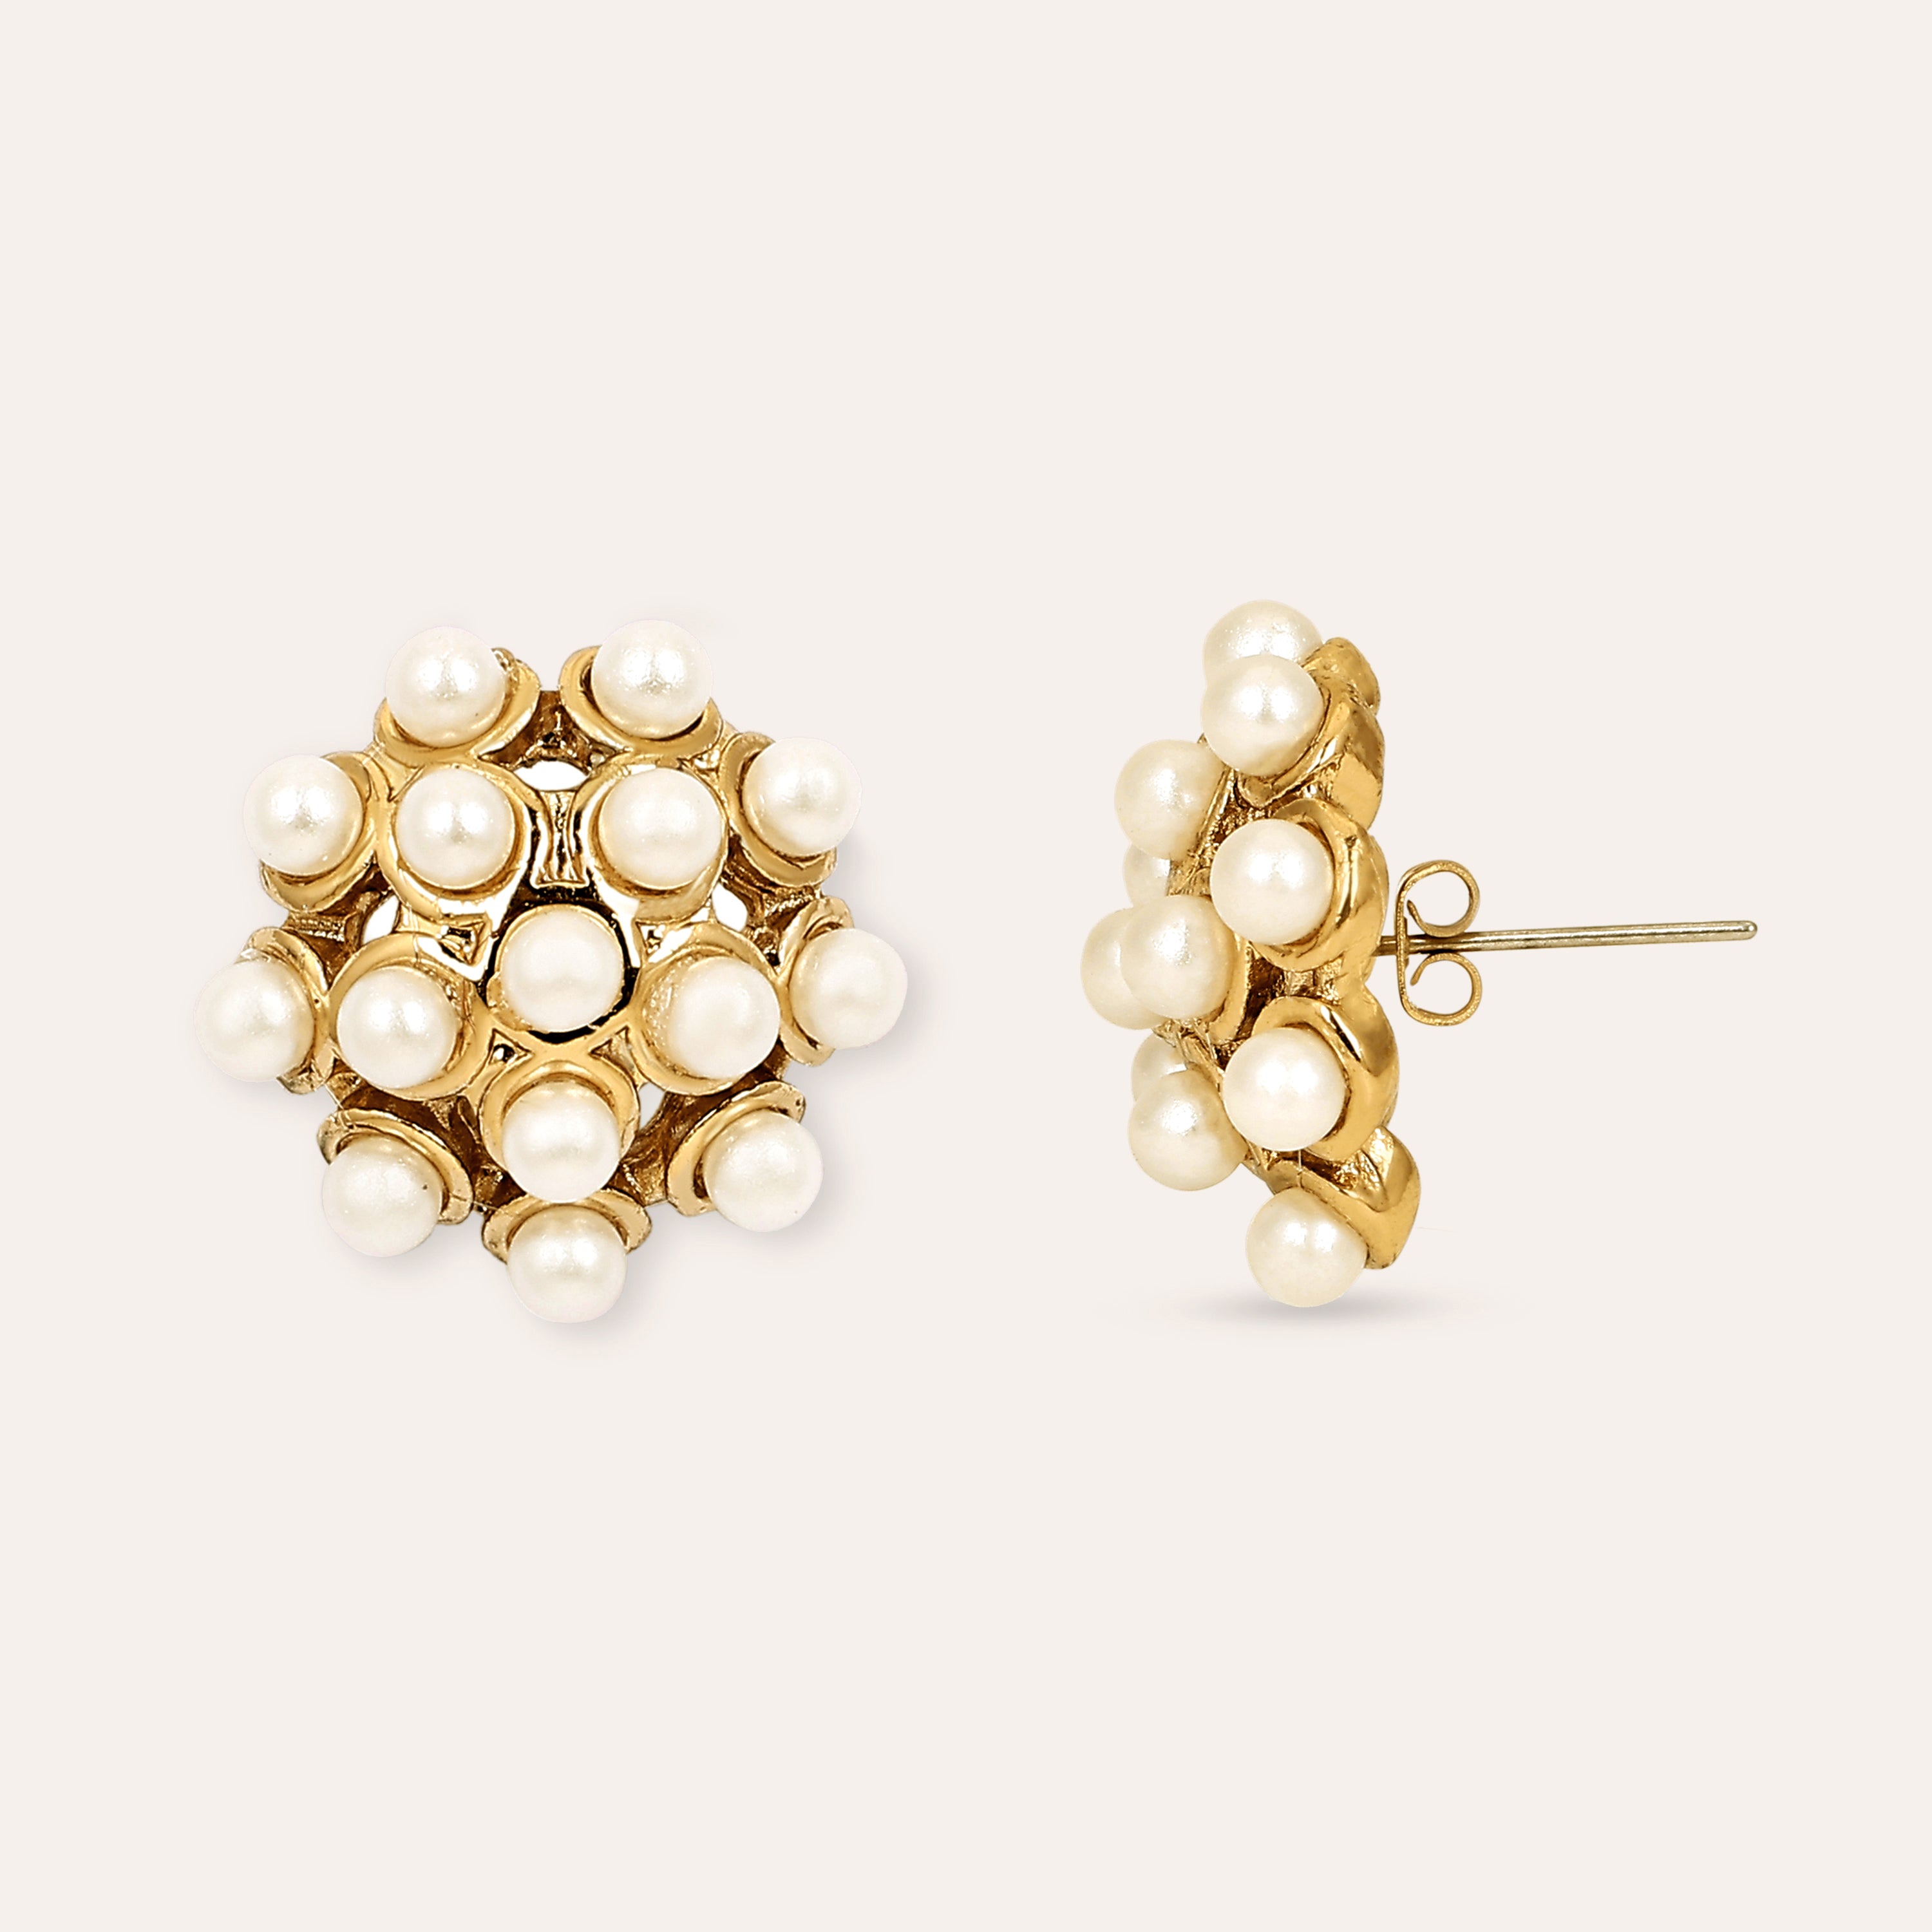 TFC PearlPop Gold Plated Earrings-Discover daily wear gold earrings including stud earrings, hoop earrings, and pearl earrings, perfect as earrings for women and earrings for girls.Find the cheapest fashion jewellery which is anti-tarnis​h only at The Fun company